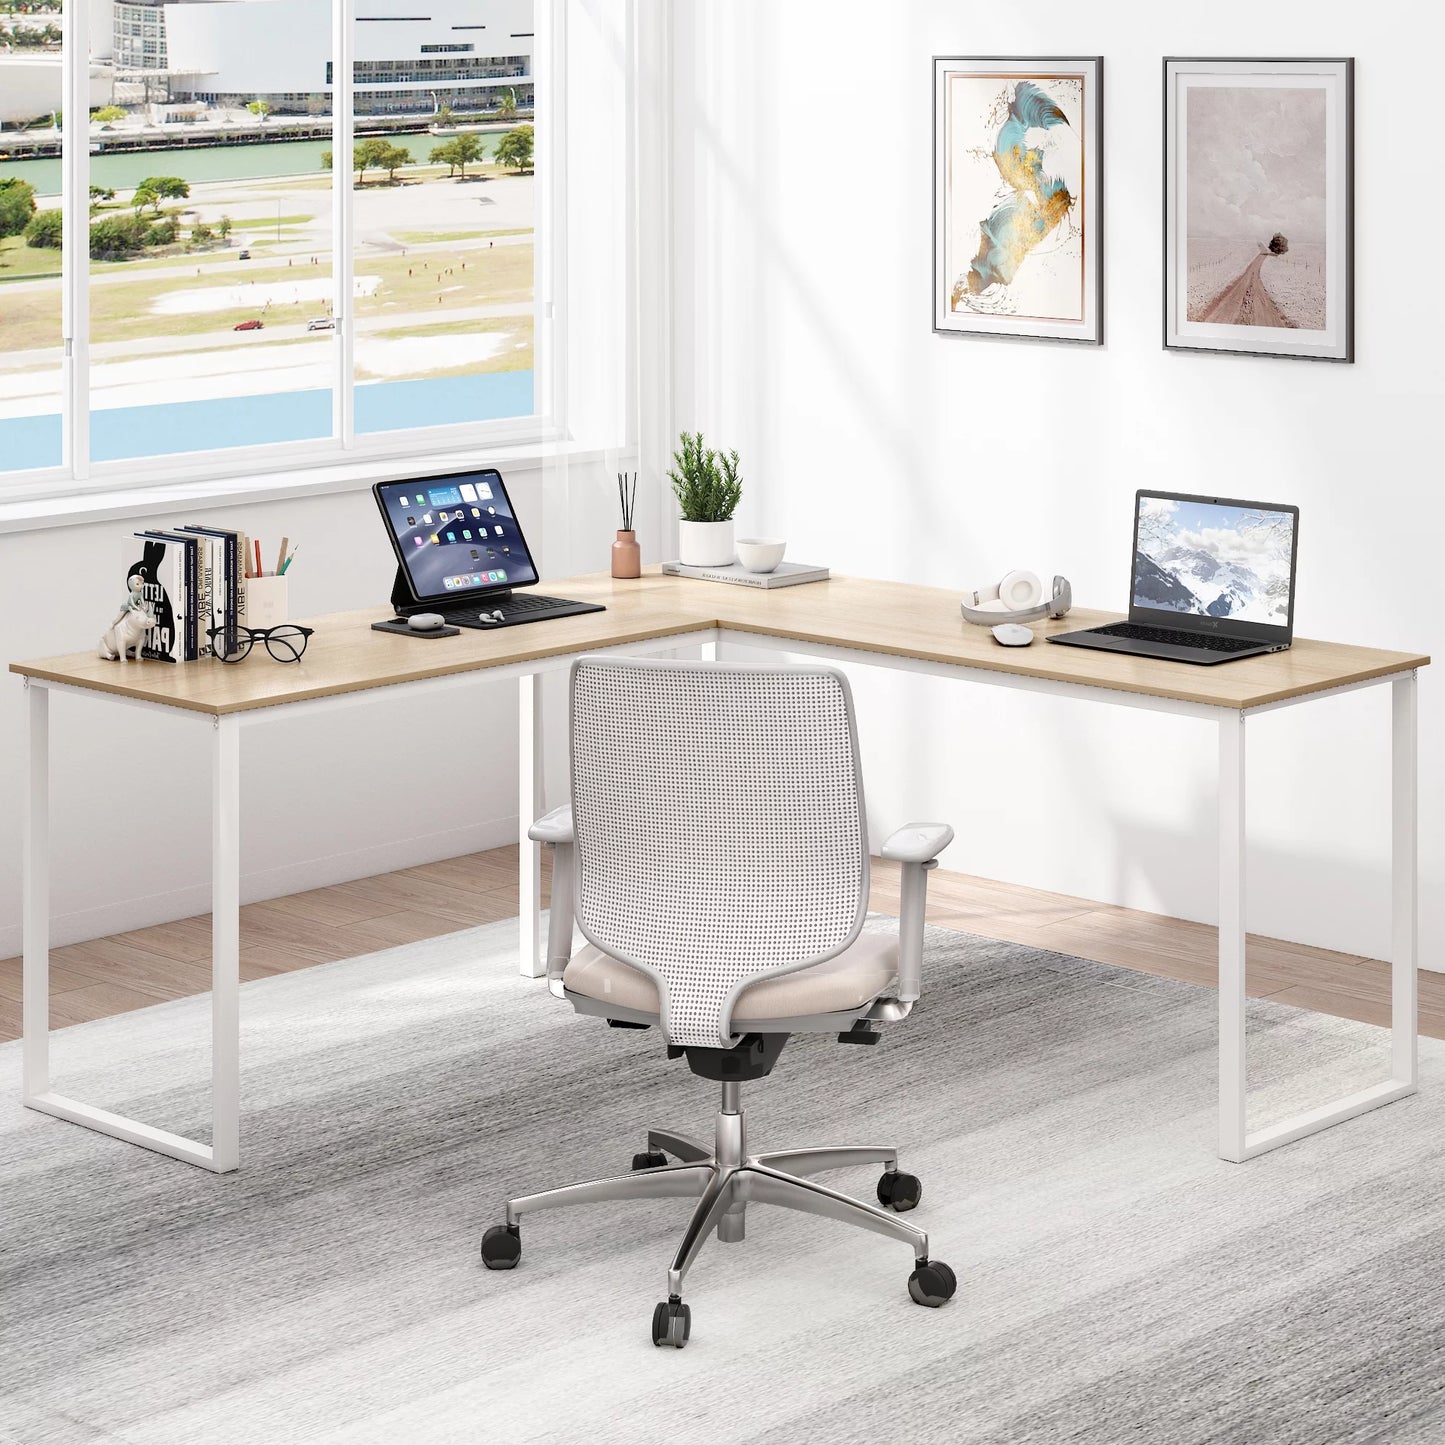 L-Shaped Computer Desk, Industrial Office Corner Desk, 58" Writing Study Table, Wood Tabletop Home Gaming Desk with Metal Frame, Large 2 Person Table for Home Office Workstation